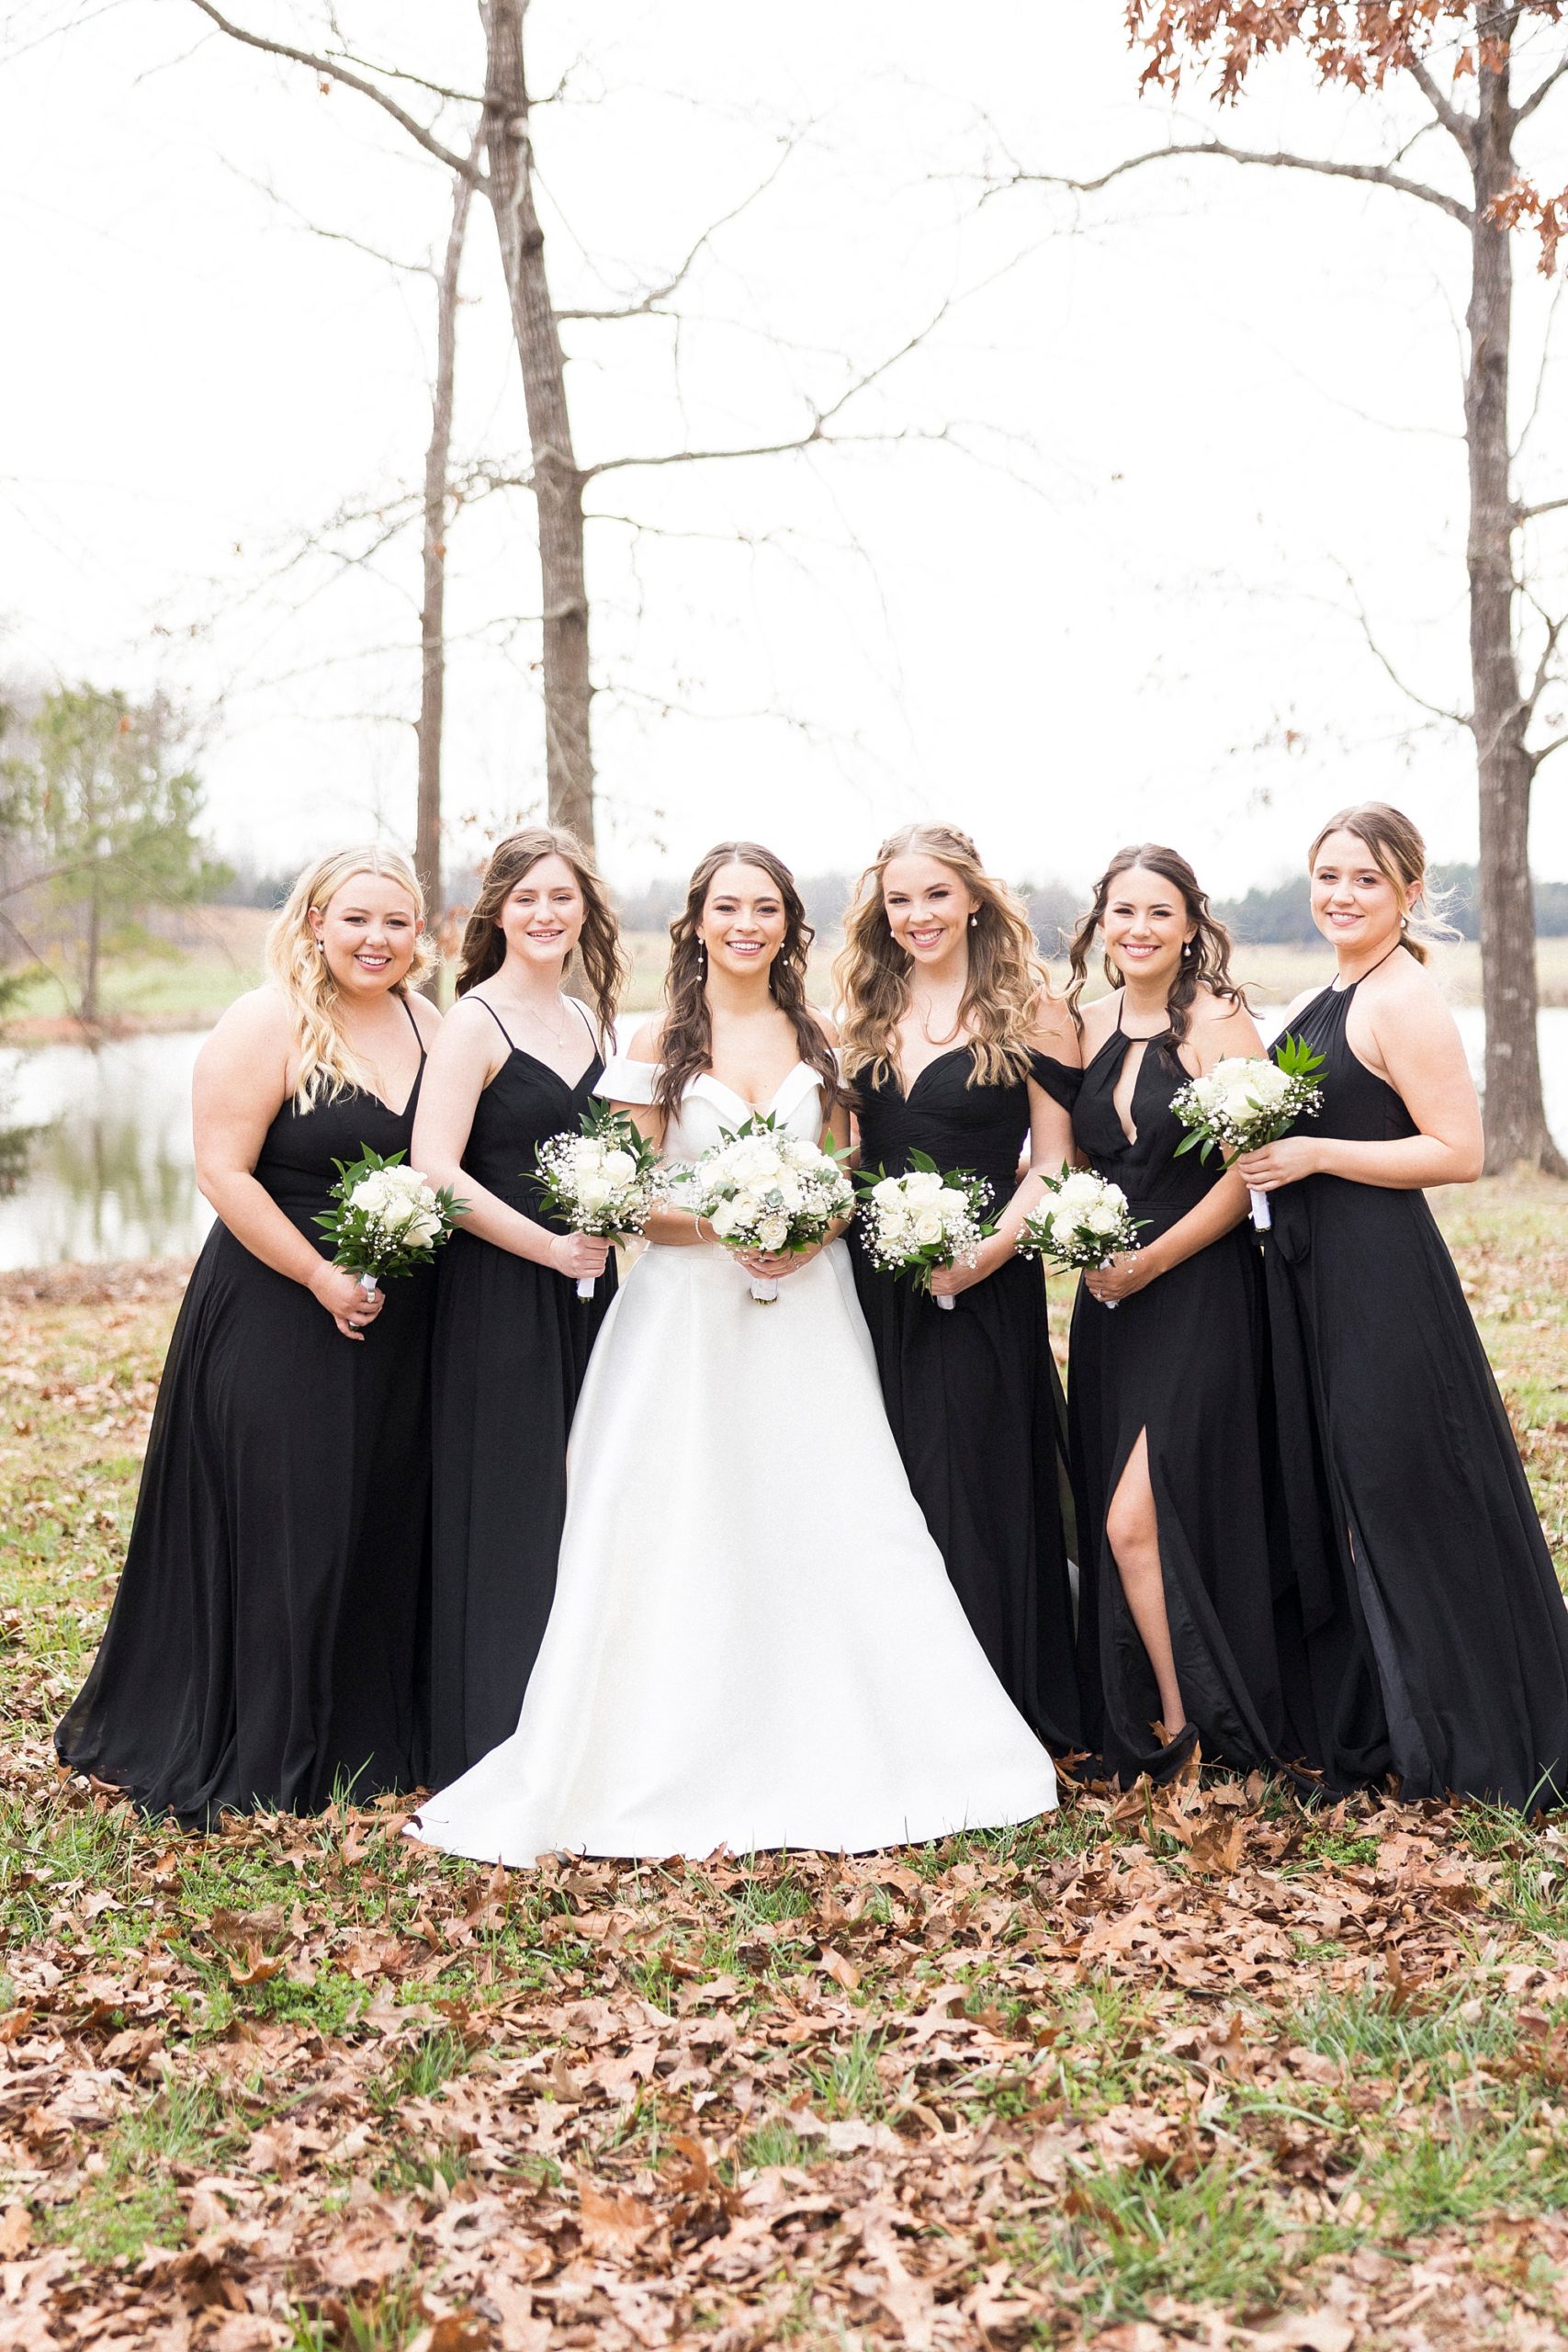 bride poses with bridesmaids in black gowns for winter wedding